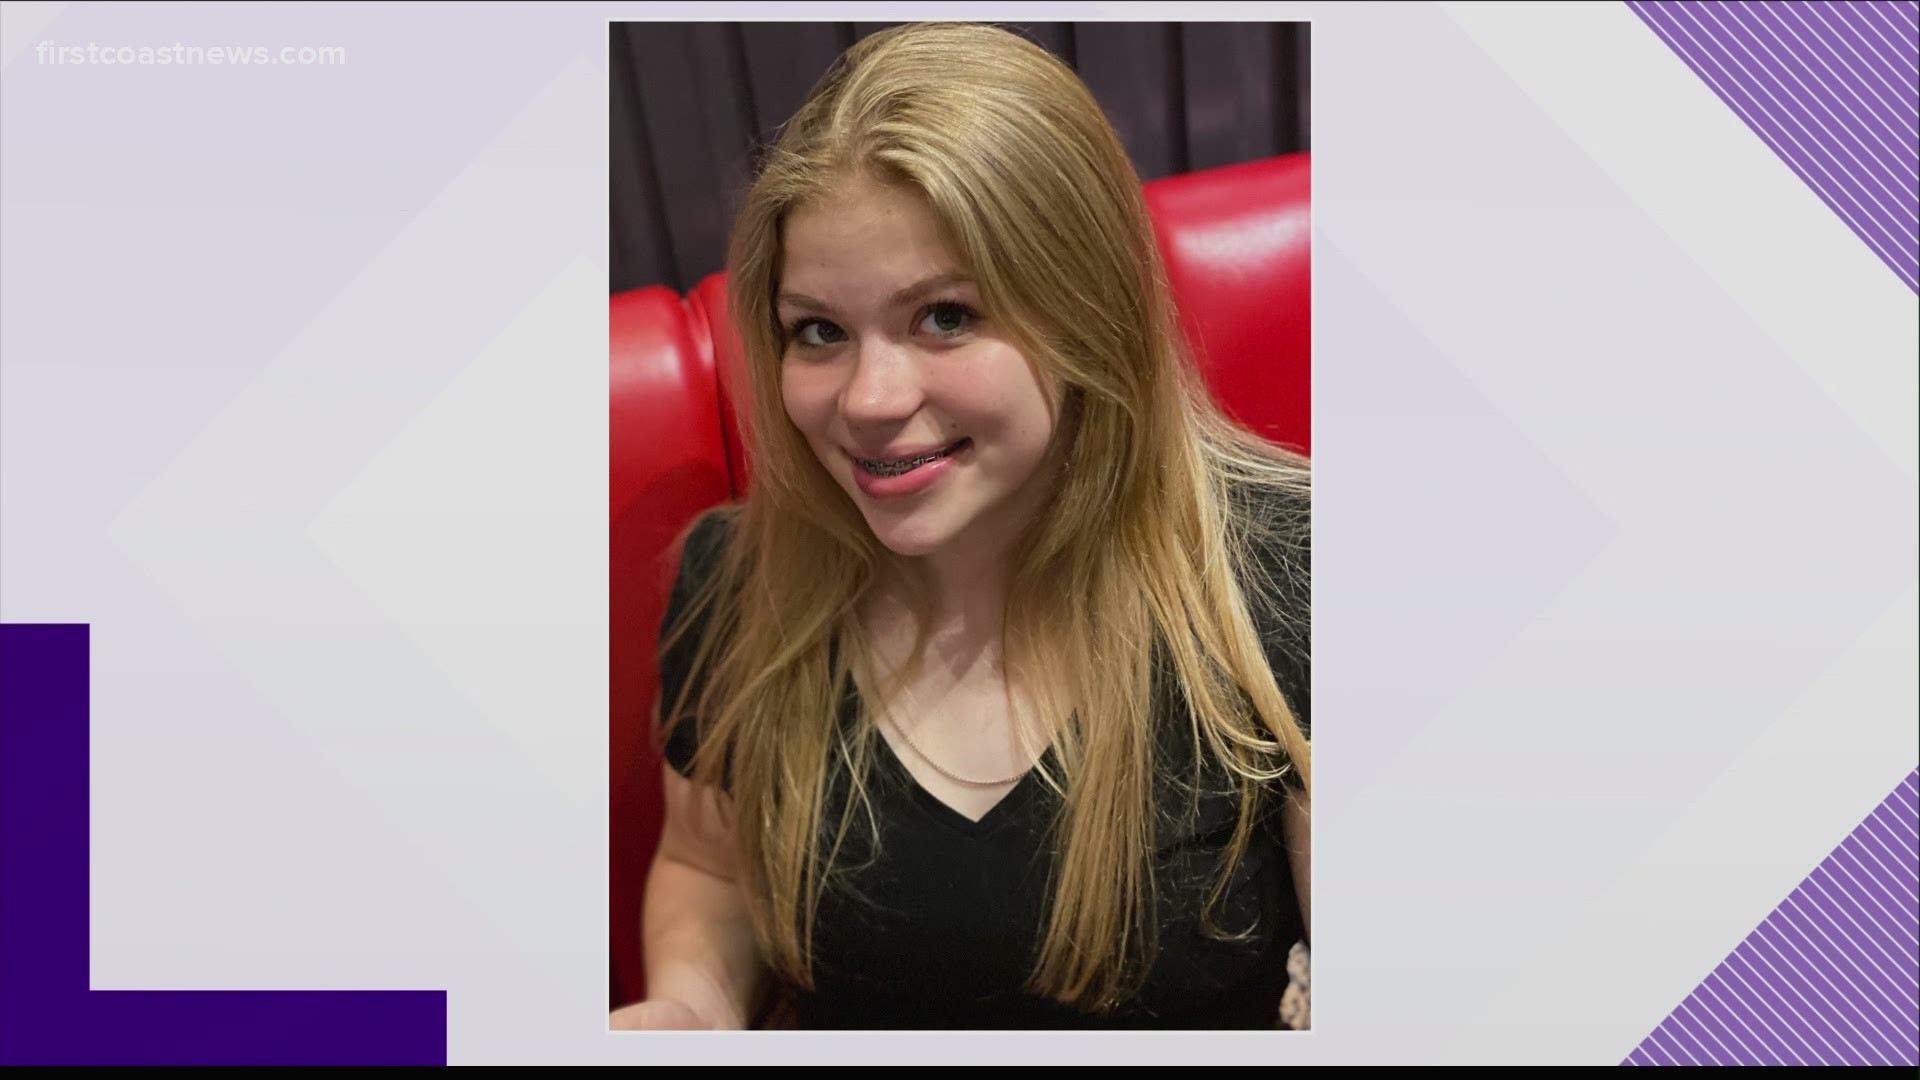 Deputies: Body found in St. Johns County believed to be missing 13-year-old girl